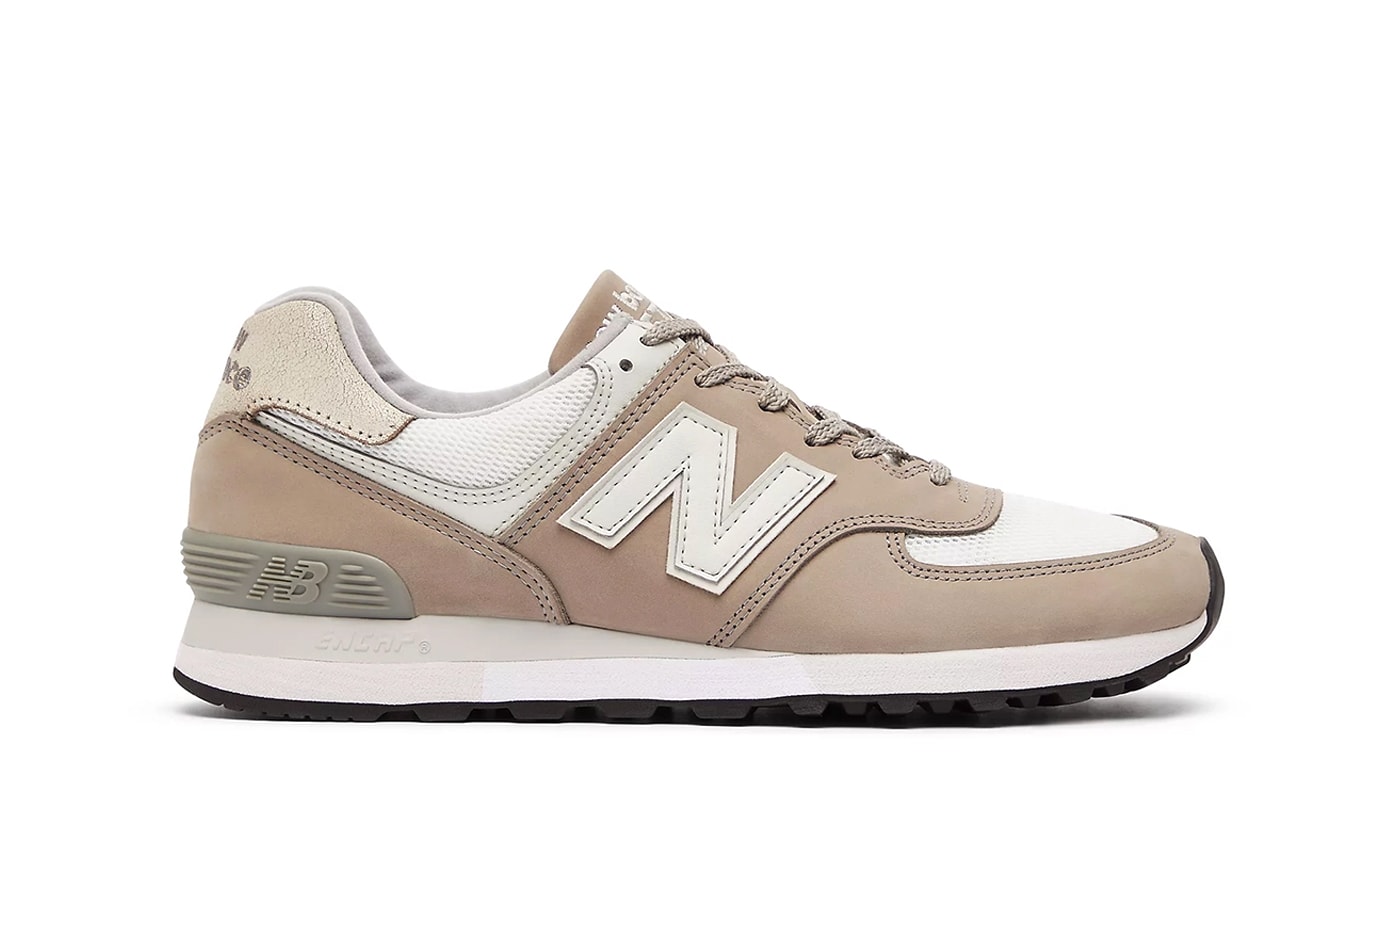 New Balance 576 Made in UK 最新配色「Toasted Nut」